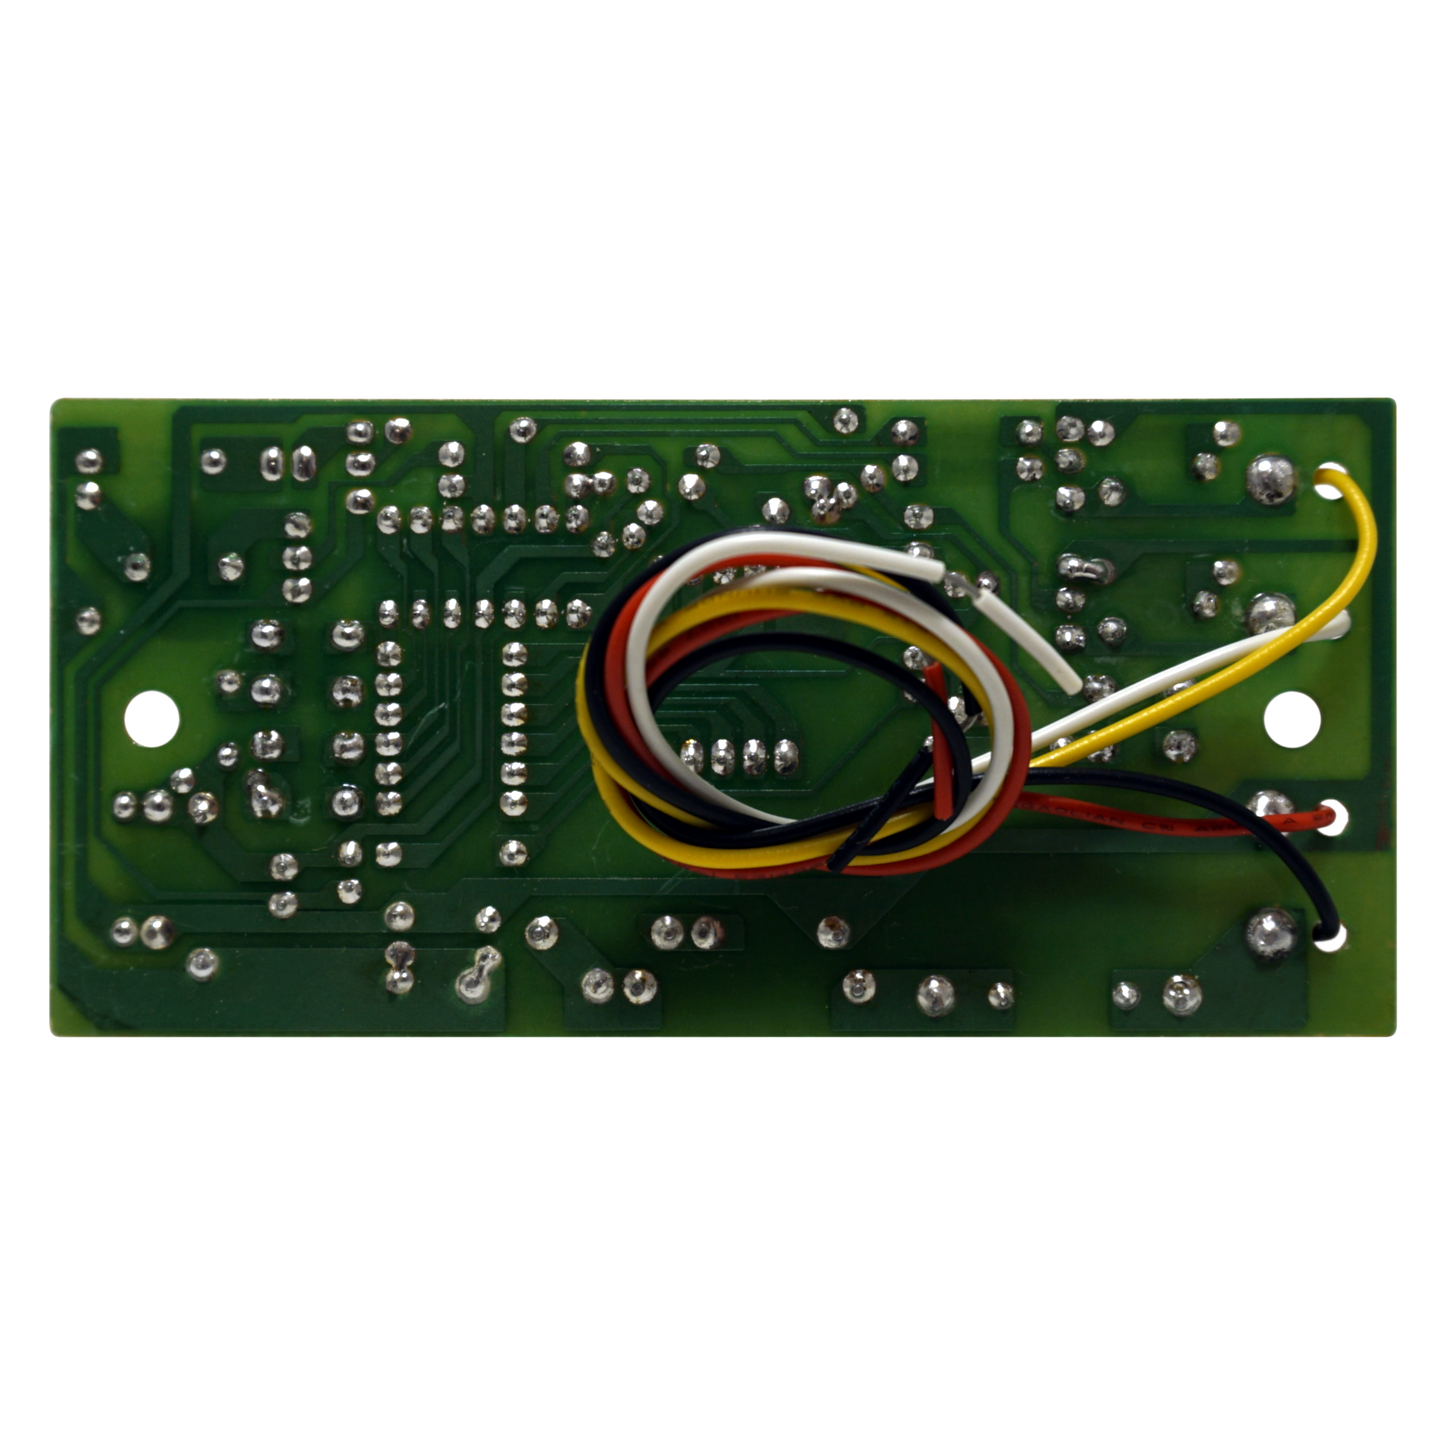 PC Control Board for our O3 PURE KT50 Elite